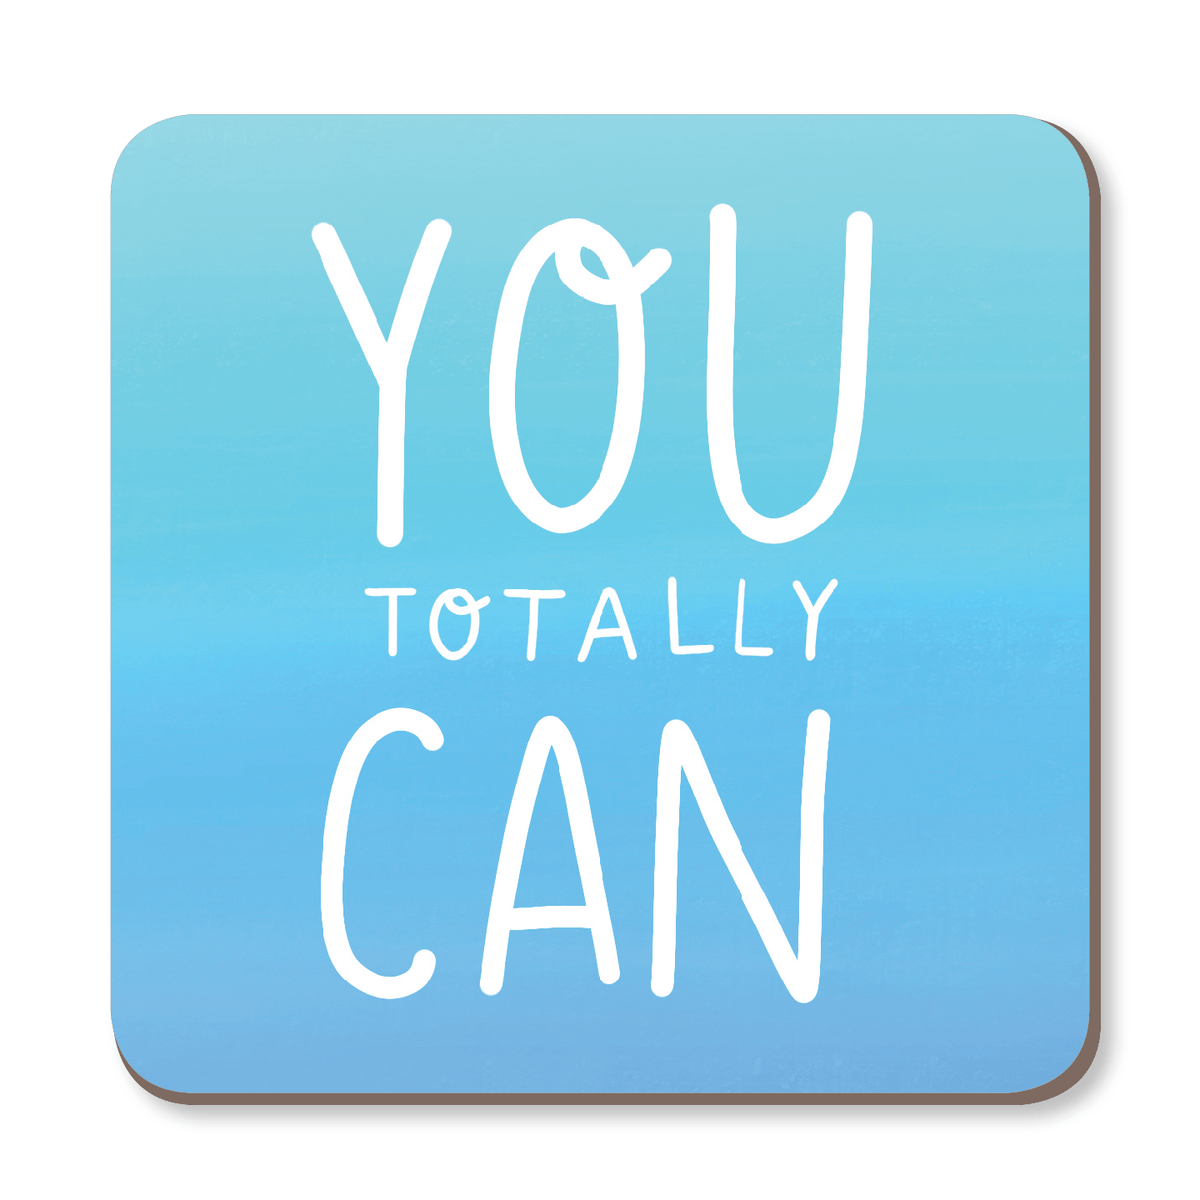 You Totally Can Motivational Coaster by Nutmeg and Arlo - Whale and Bird